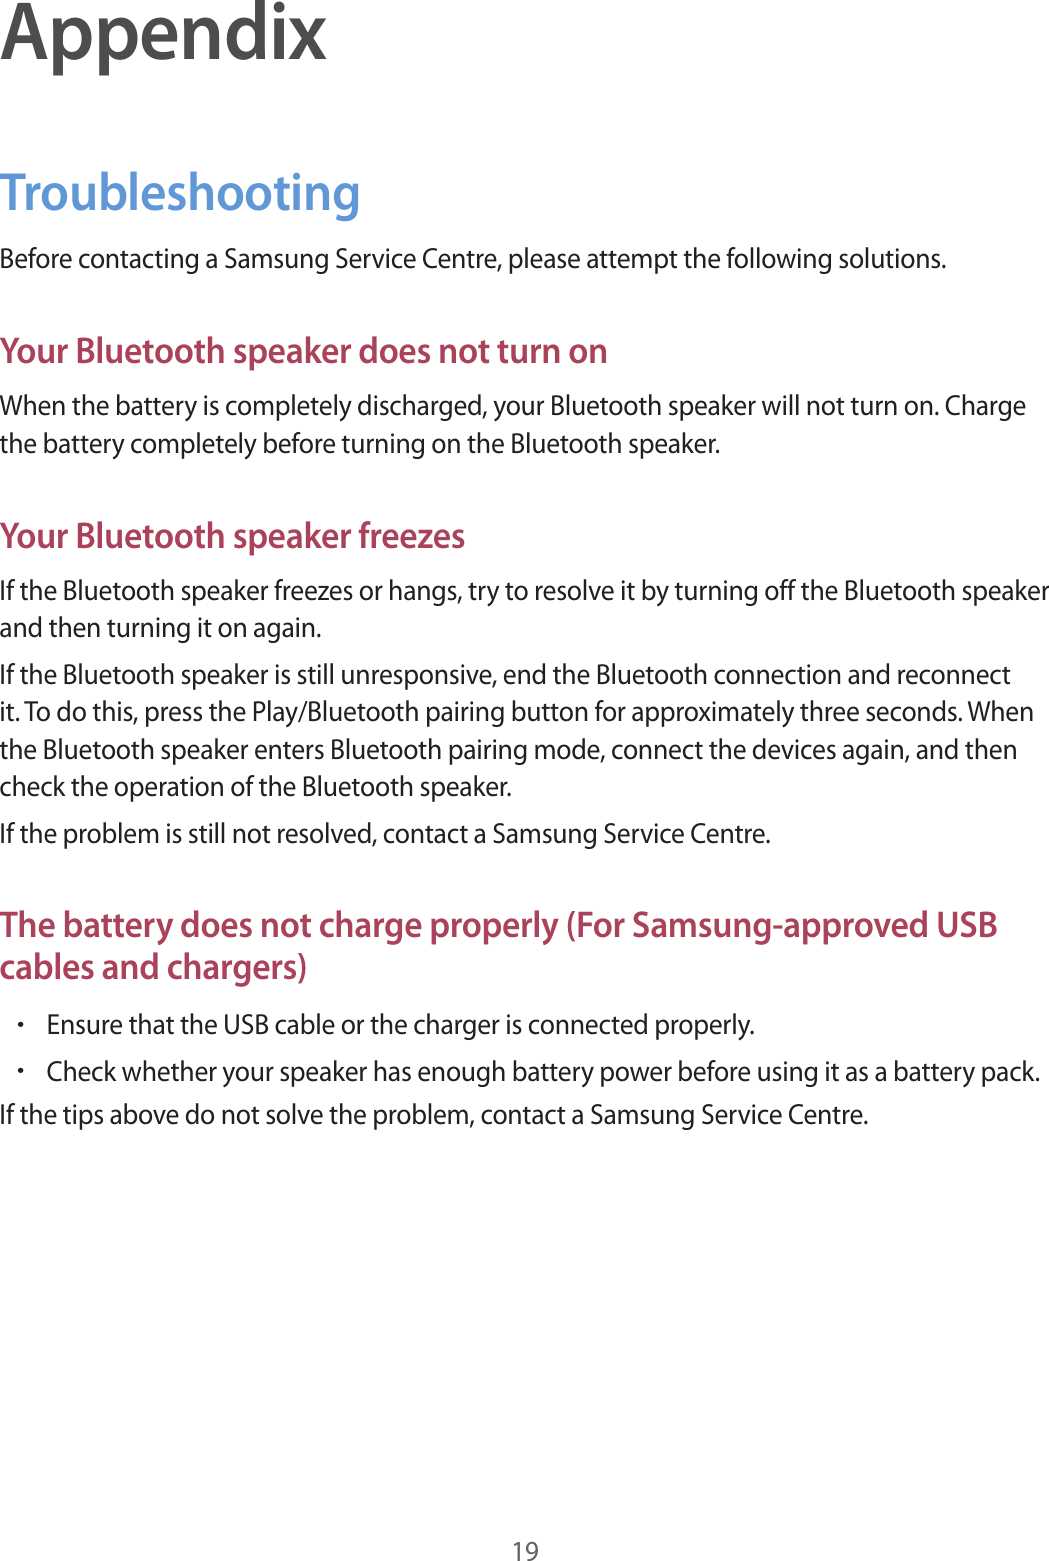 19AppendixTroubleshootingBefore contacting a Samsung Service Centre, please attempt the following solutions.Your Bluetooth speaker does not turn onWhen the battery is completely discharged, your Bluetooth speaker will not turn on. Charge the battery completely before turning on the Bluetooth speaker.Your Bluetooth speaker freezesIf the Bluetooth speaker freezes or hangs, try to resolve it by turning off the Bluetooth speaker and then turning it on again.If the Bluetooth speaker is still unresponsive, end the Bluetooth connection and reconnect it. To do this, press the Play/Bluetooth pairing button for approximately three seconds. When the Bluetooth speaker enters Bluetooth pairing mode, connect the devices again, and then check the operation of the Bluetooth speaker.If the problem is still not resolved, contact a Samsung Service Centre.The battery does not charge properly (For Samsung-approved USB cables and chargers)•Ensure that the USB cable or the charger is connected properly.•Check whether your speaker has enough battery power before using it as a battery pack.If the tips above do not solve the problem, contact a Samsung Service Centre.